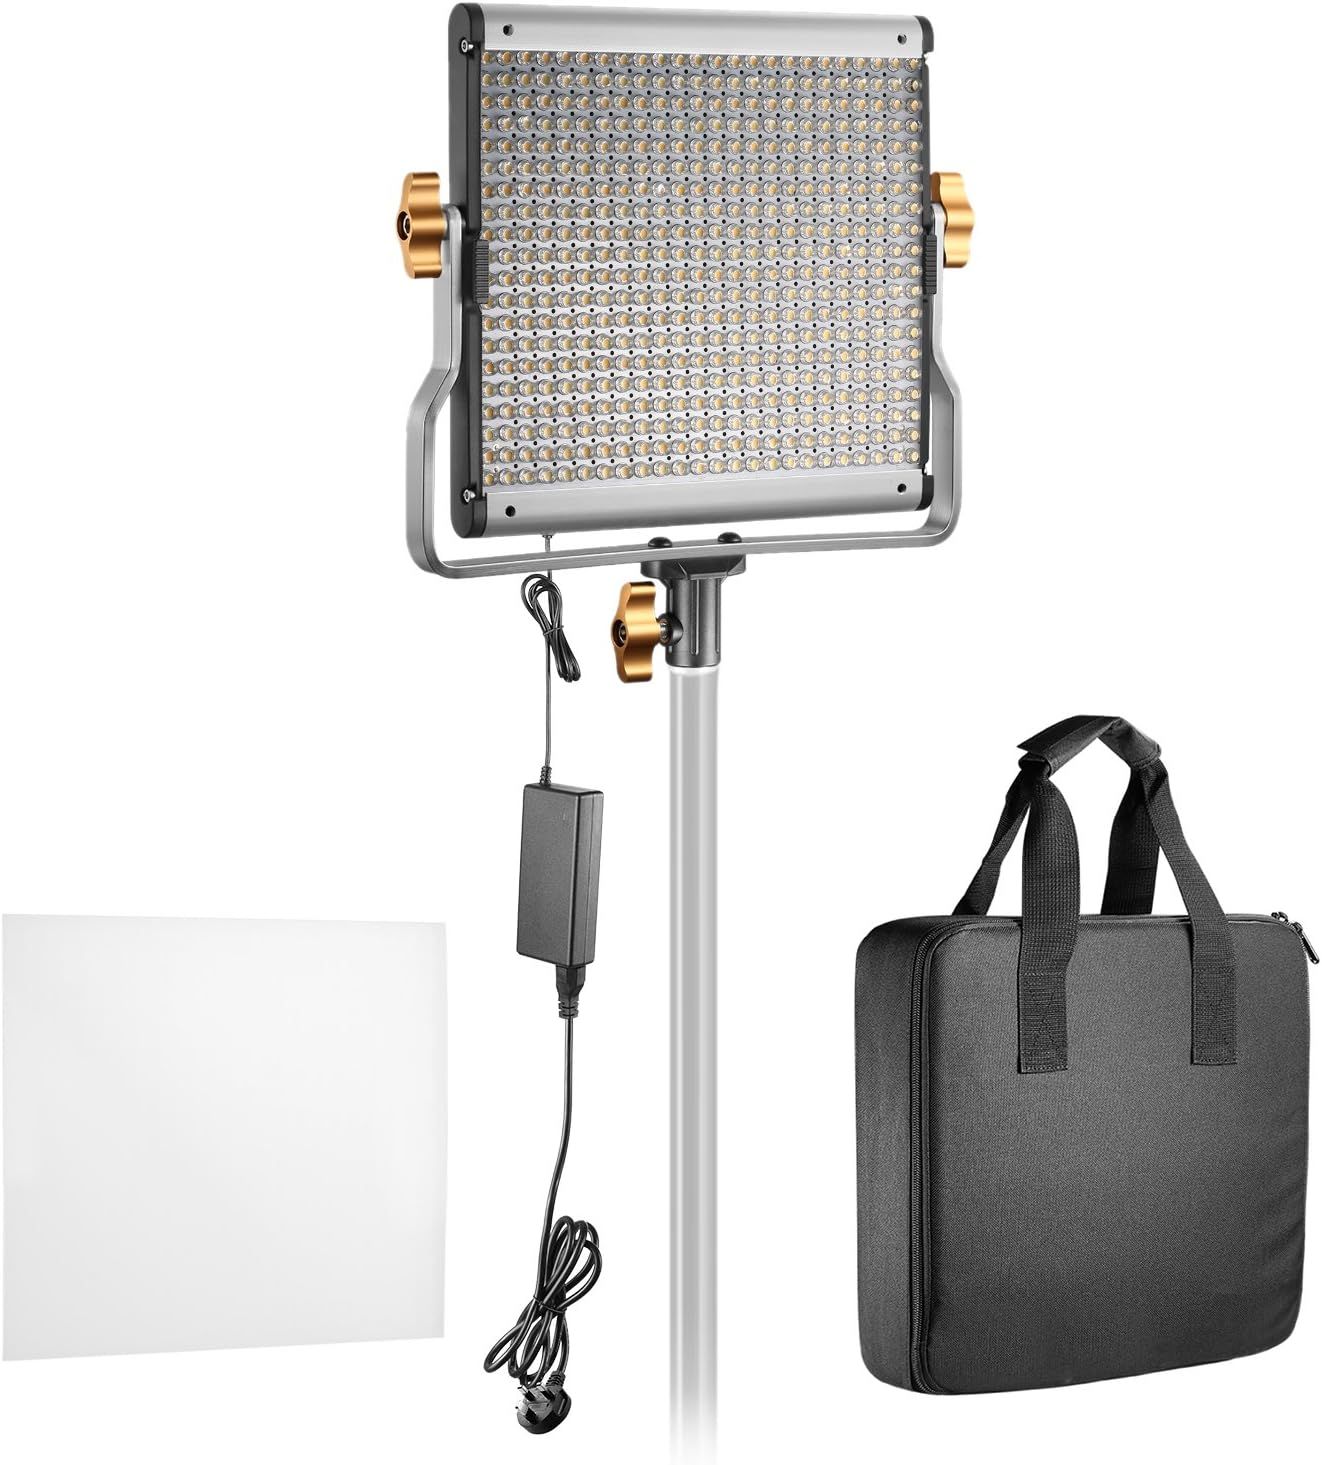 Neewer Packs Dimmable Bi-color LED with U Bracket Professional Video Light  for Studio, YouTube Outdoor Video Photography Lighting Kit, Durable Metal  Frame, 480 LED Beads(UK Plug), Photography, Photography Accessories,  Lighting 